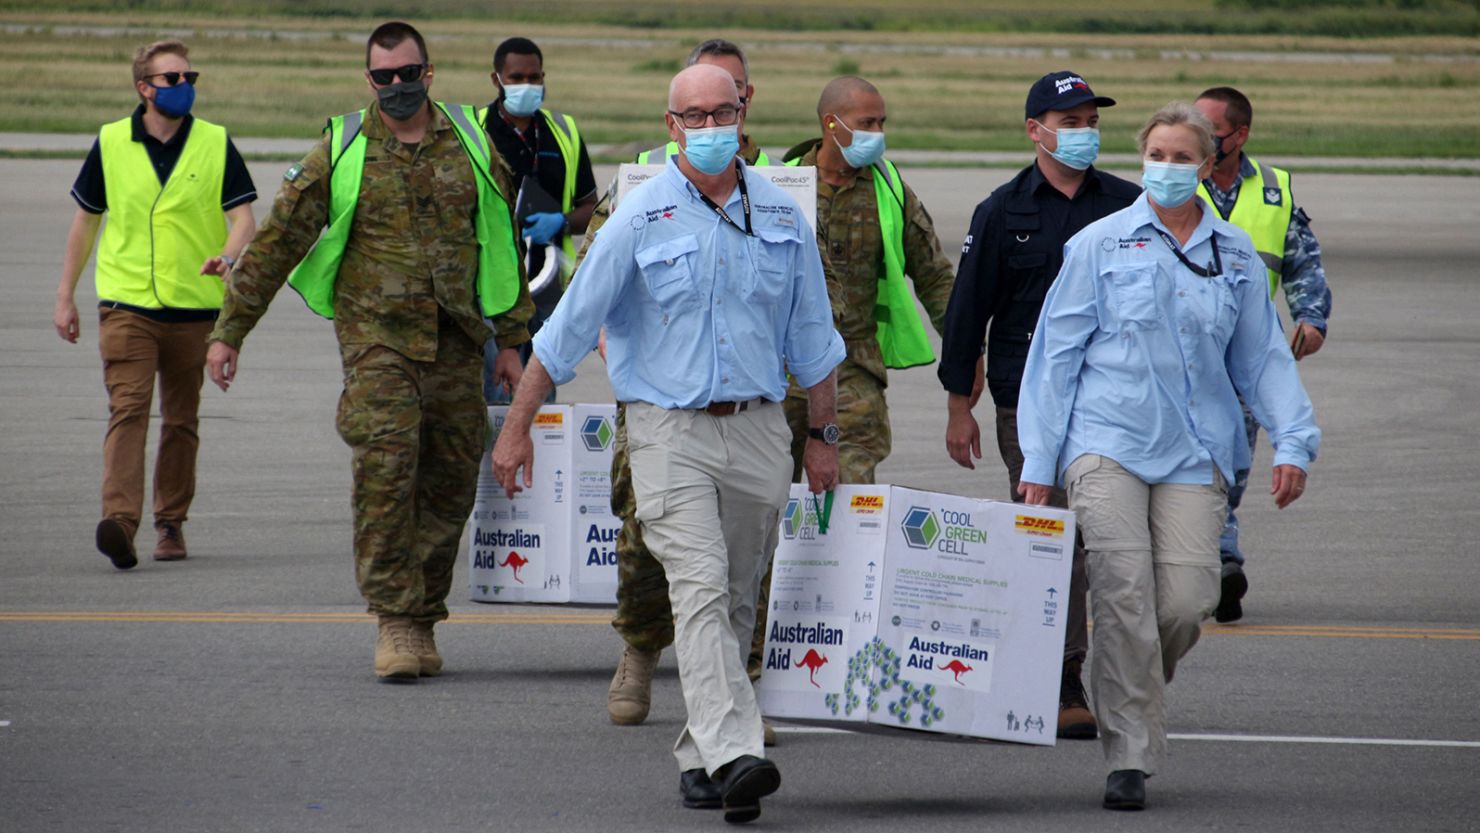 Australian officials carry boxes containing some 8,000 doses of the AstraZeneca vaccine at the Port Moresby international airport on March 23, 2021.